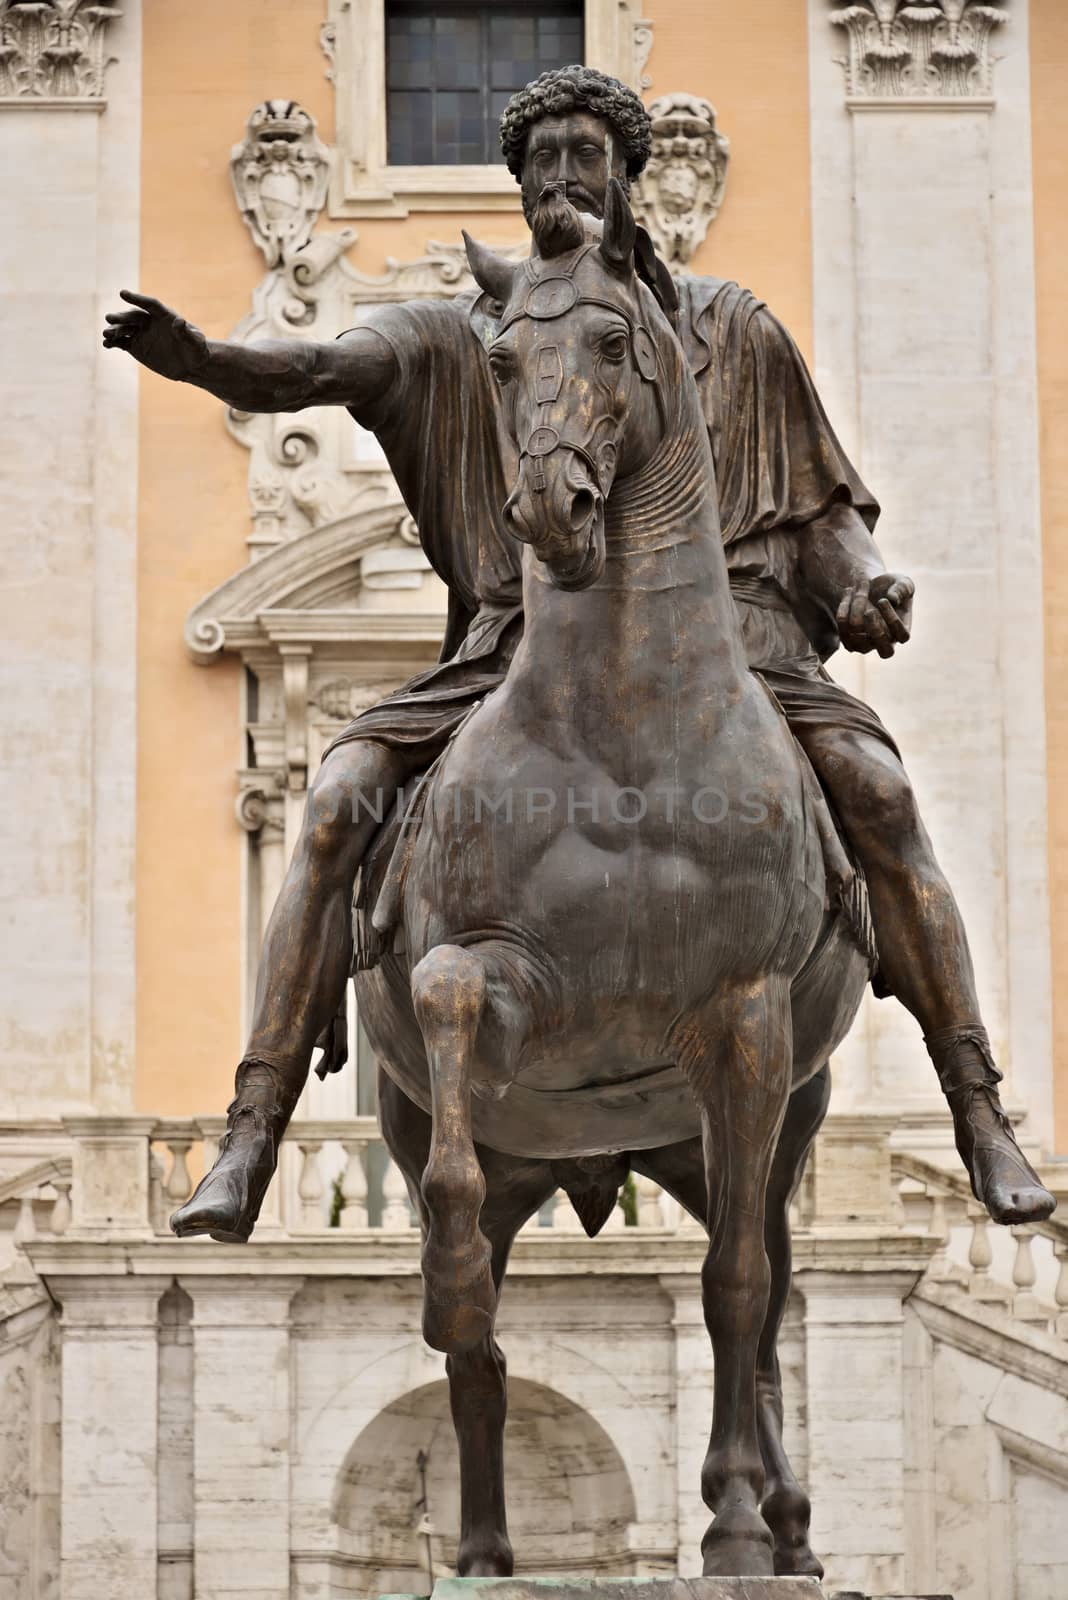 Rome, Italy. 05/04/2019. Equestrian statue of Marcus Aurelius on the Capitol. Bronze sculpture in the center of the square designed by Michelangelo.